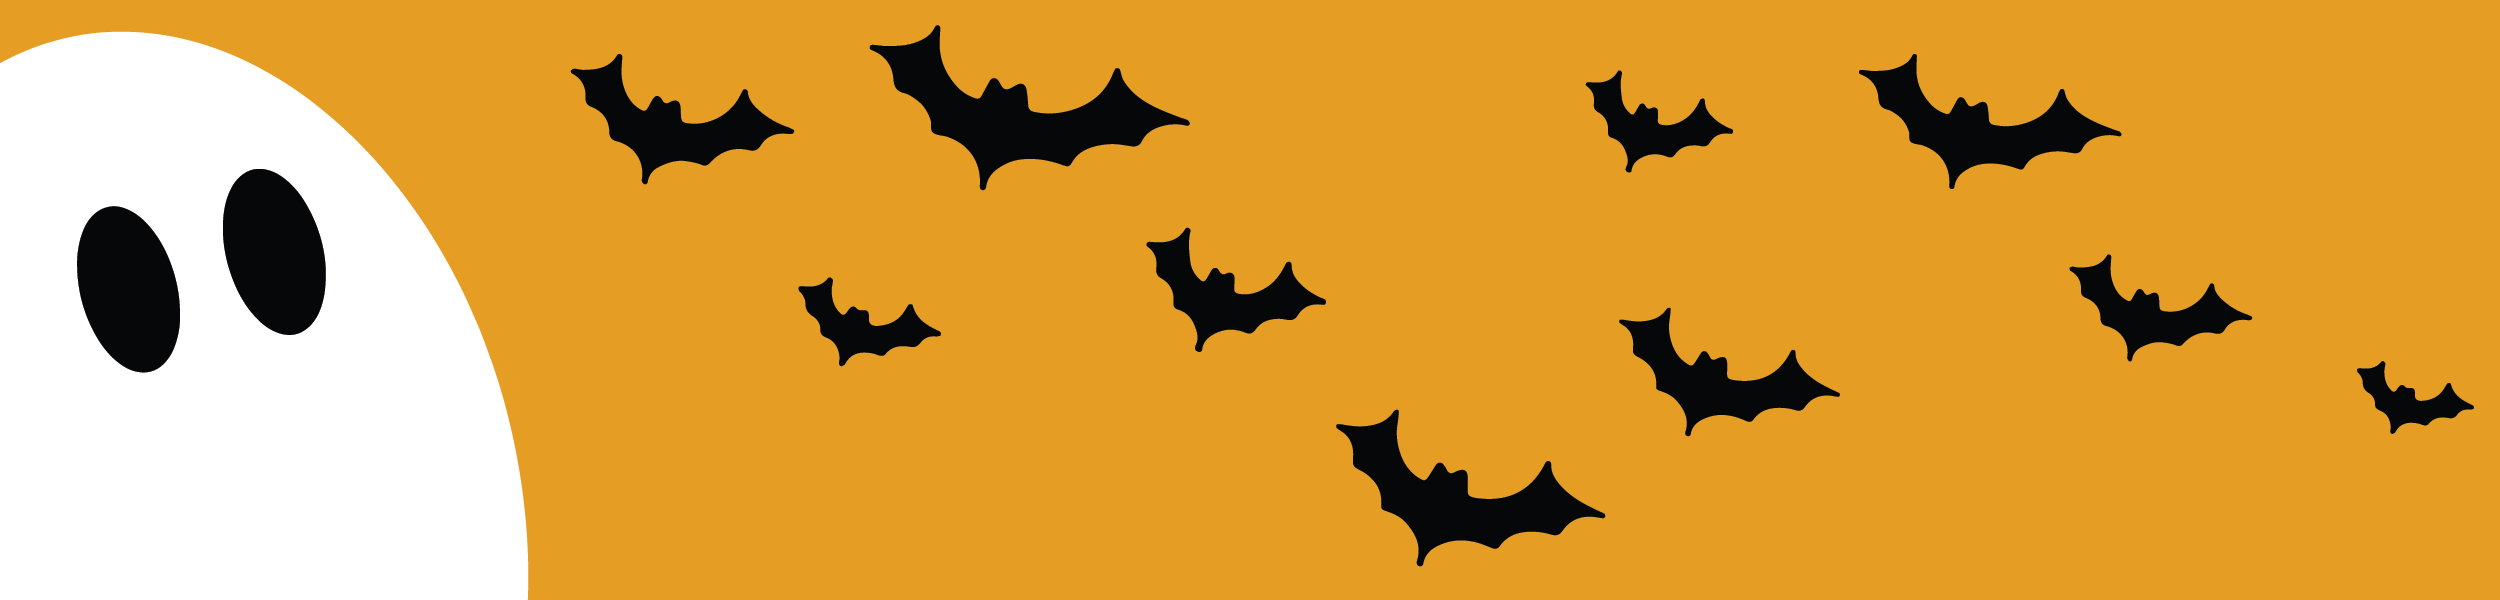 illustration of white ghost watching black bats fly against a yellow-orange background.